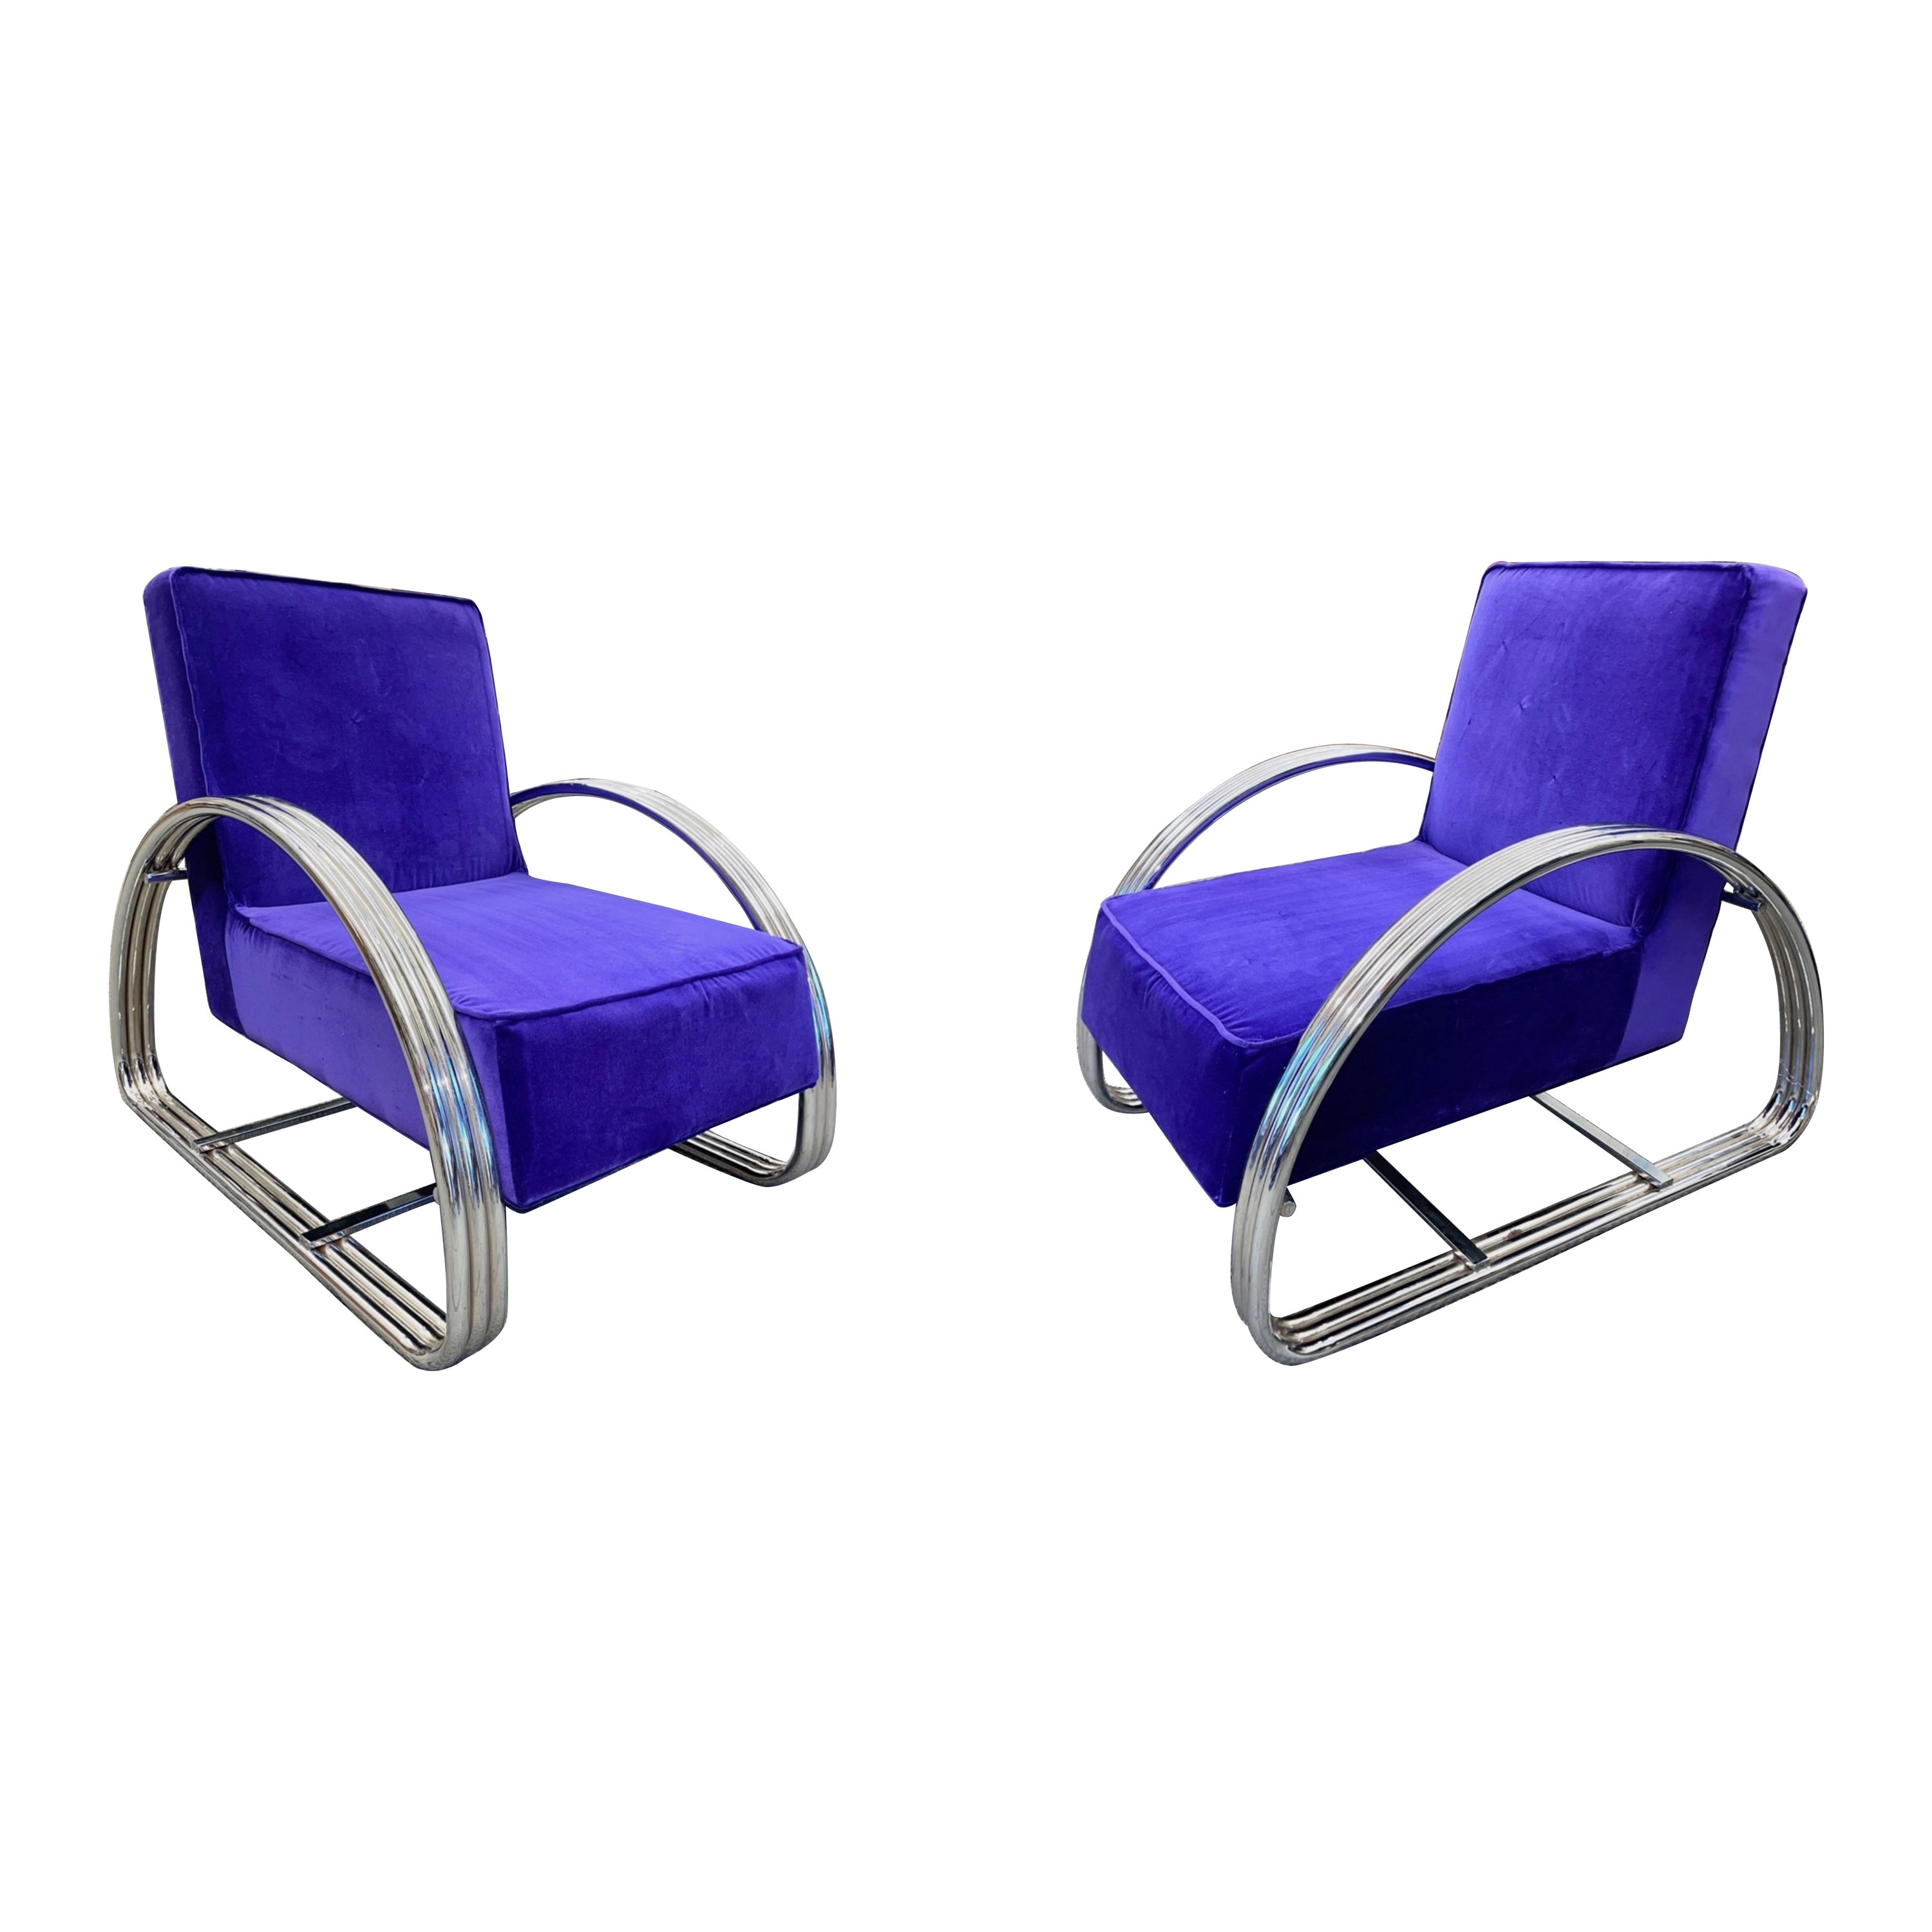 Pair of Ralph Lauren Hudson Street Lounge Chairs For Sale